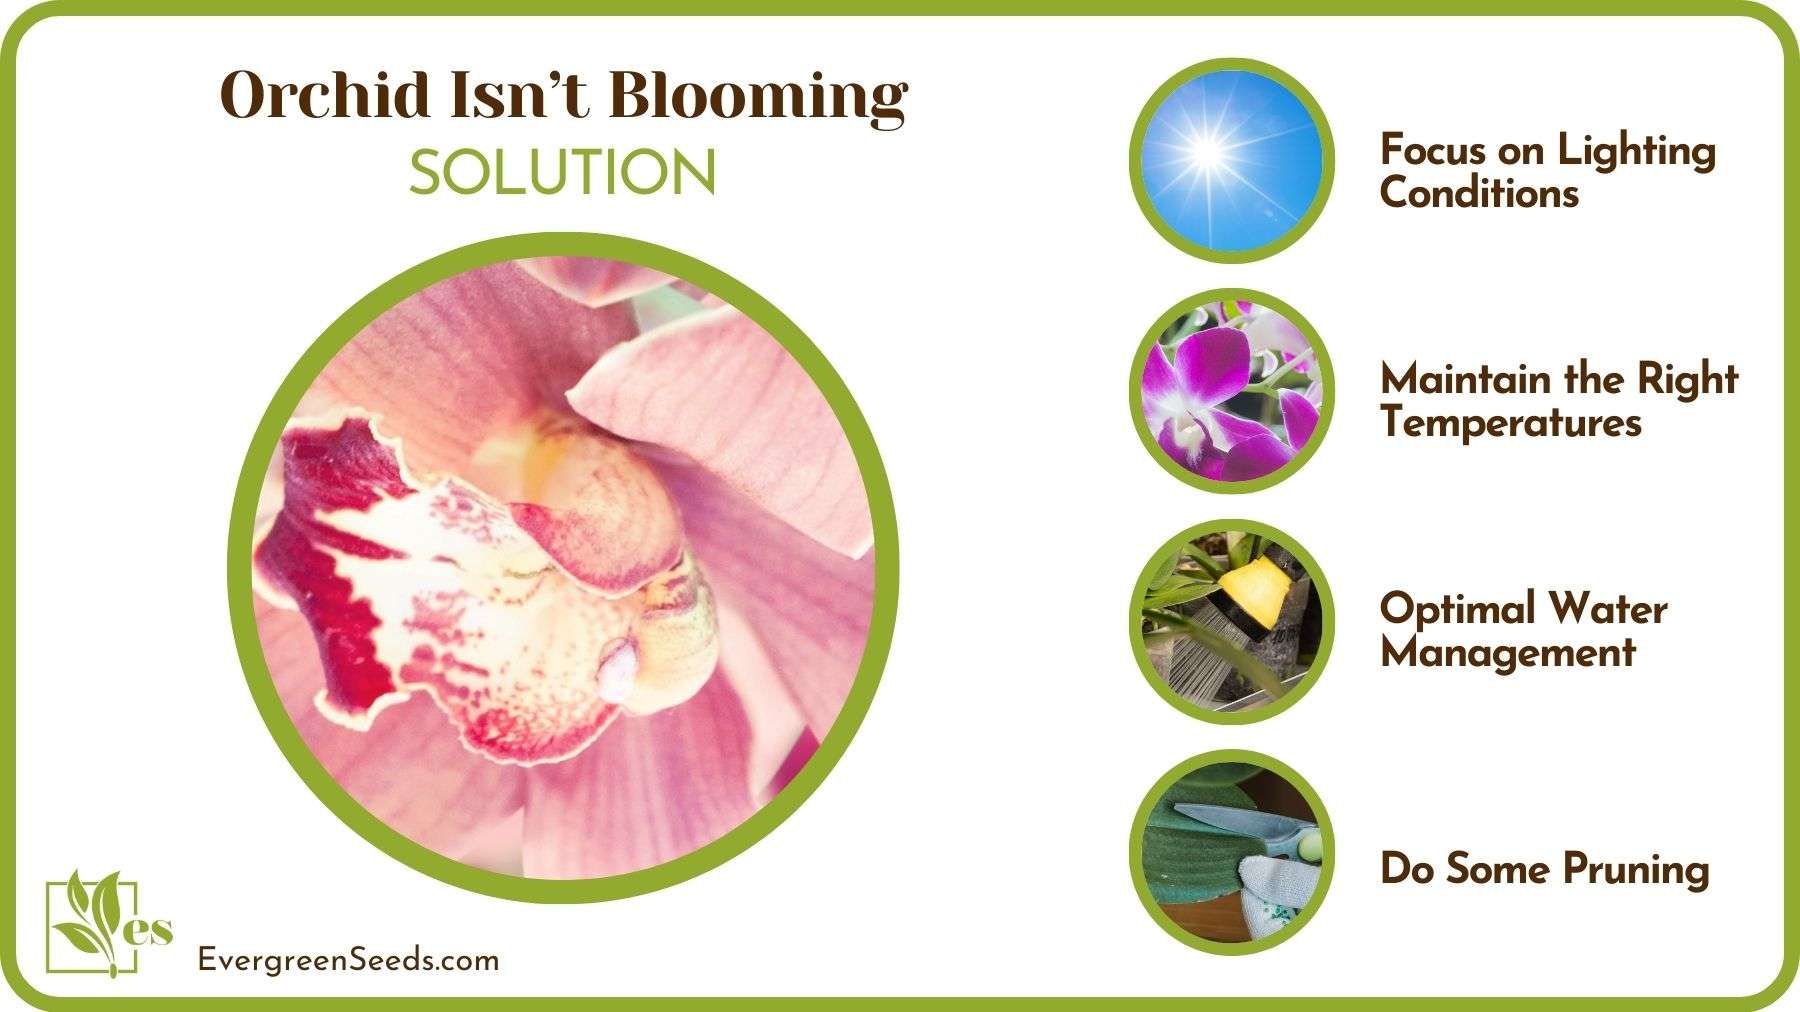 How To Make Orchid Produce Blooms